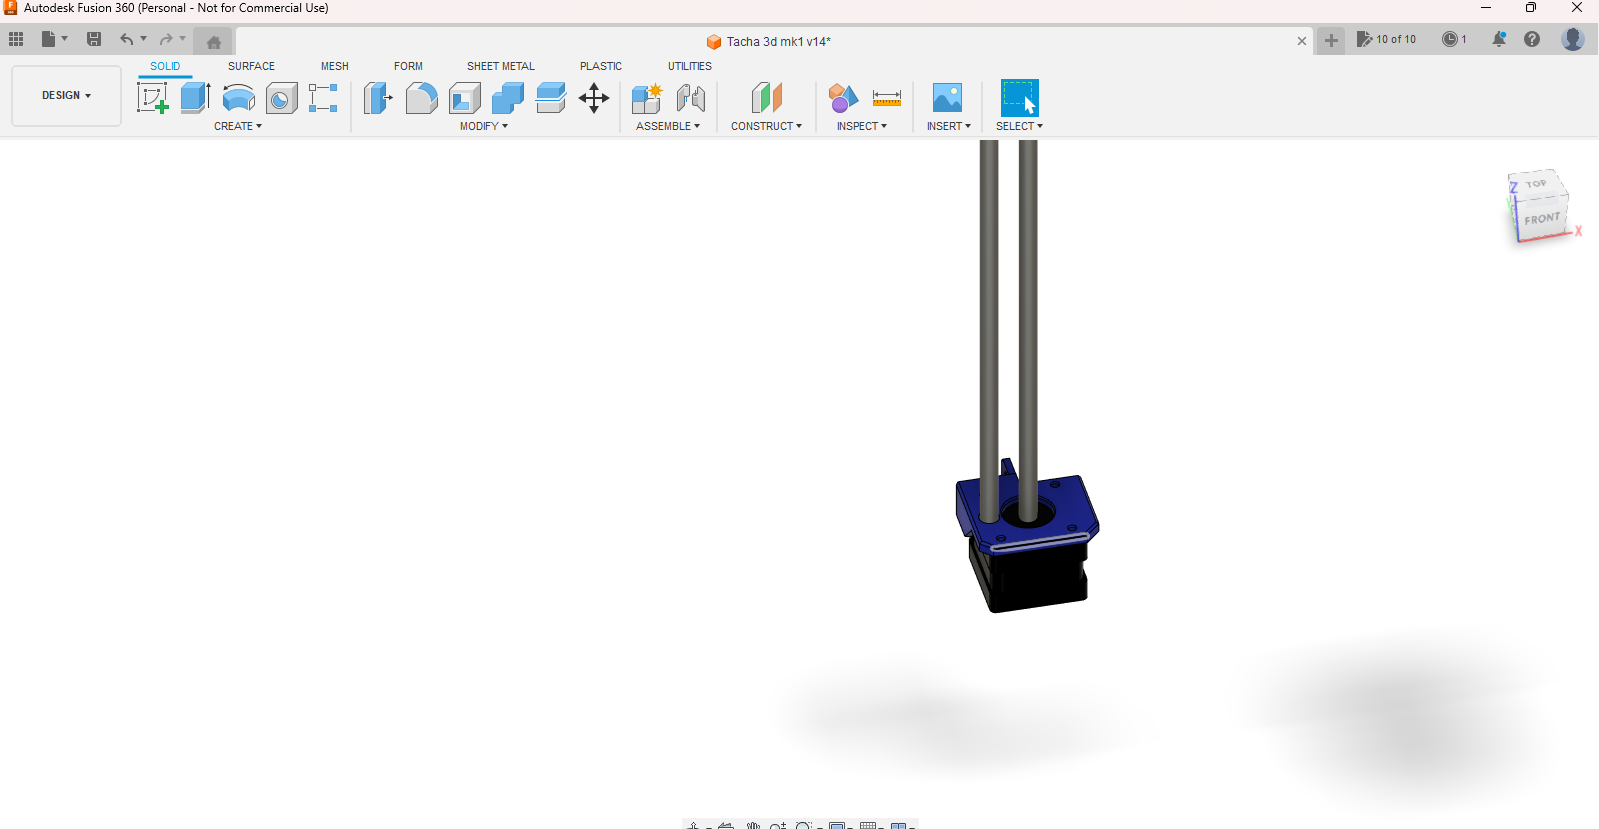 Autodesk Fusion 360 (Personal - Not for Commercial Use) 6_30_2023 9_19_49 PM.png